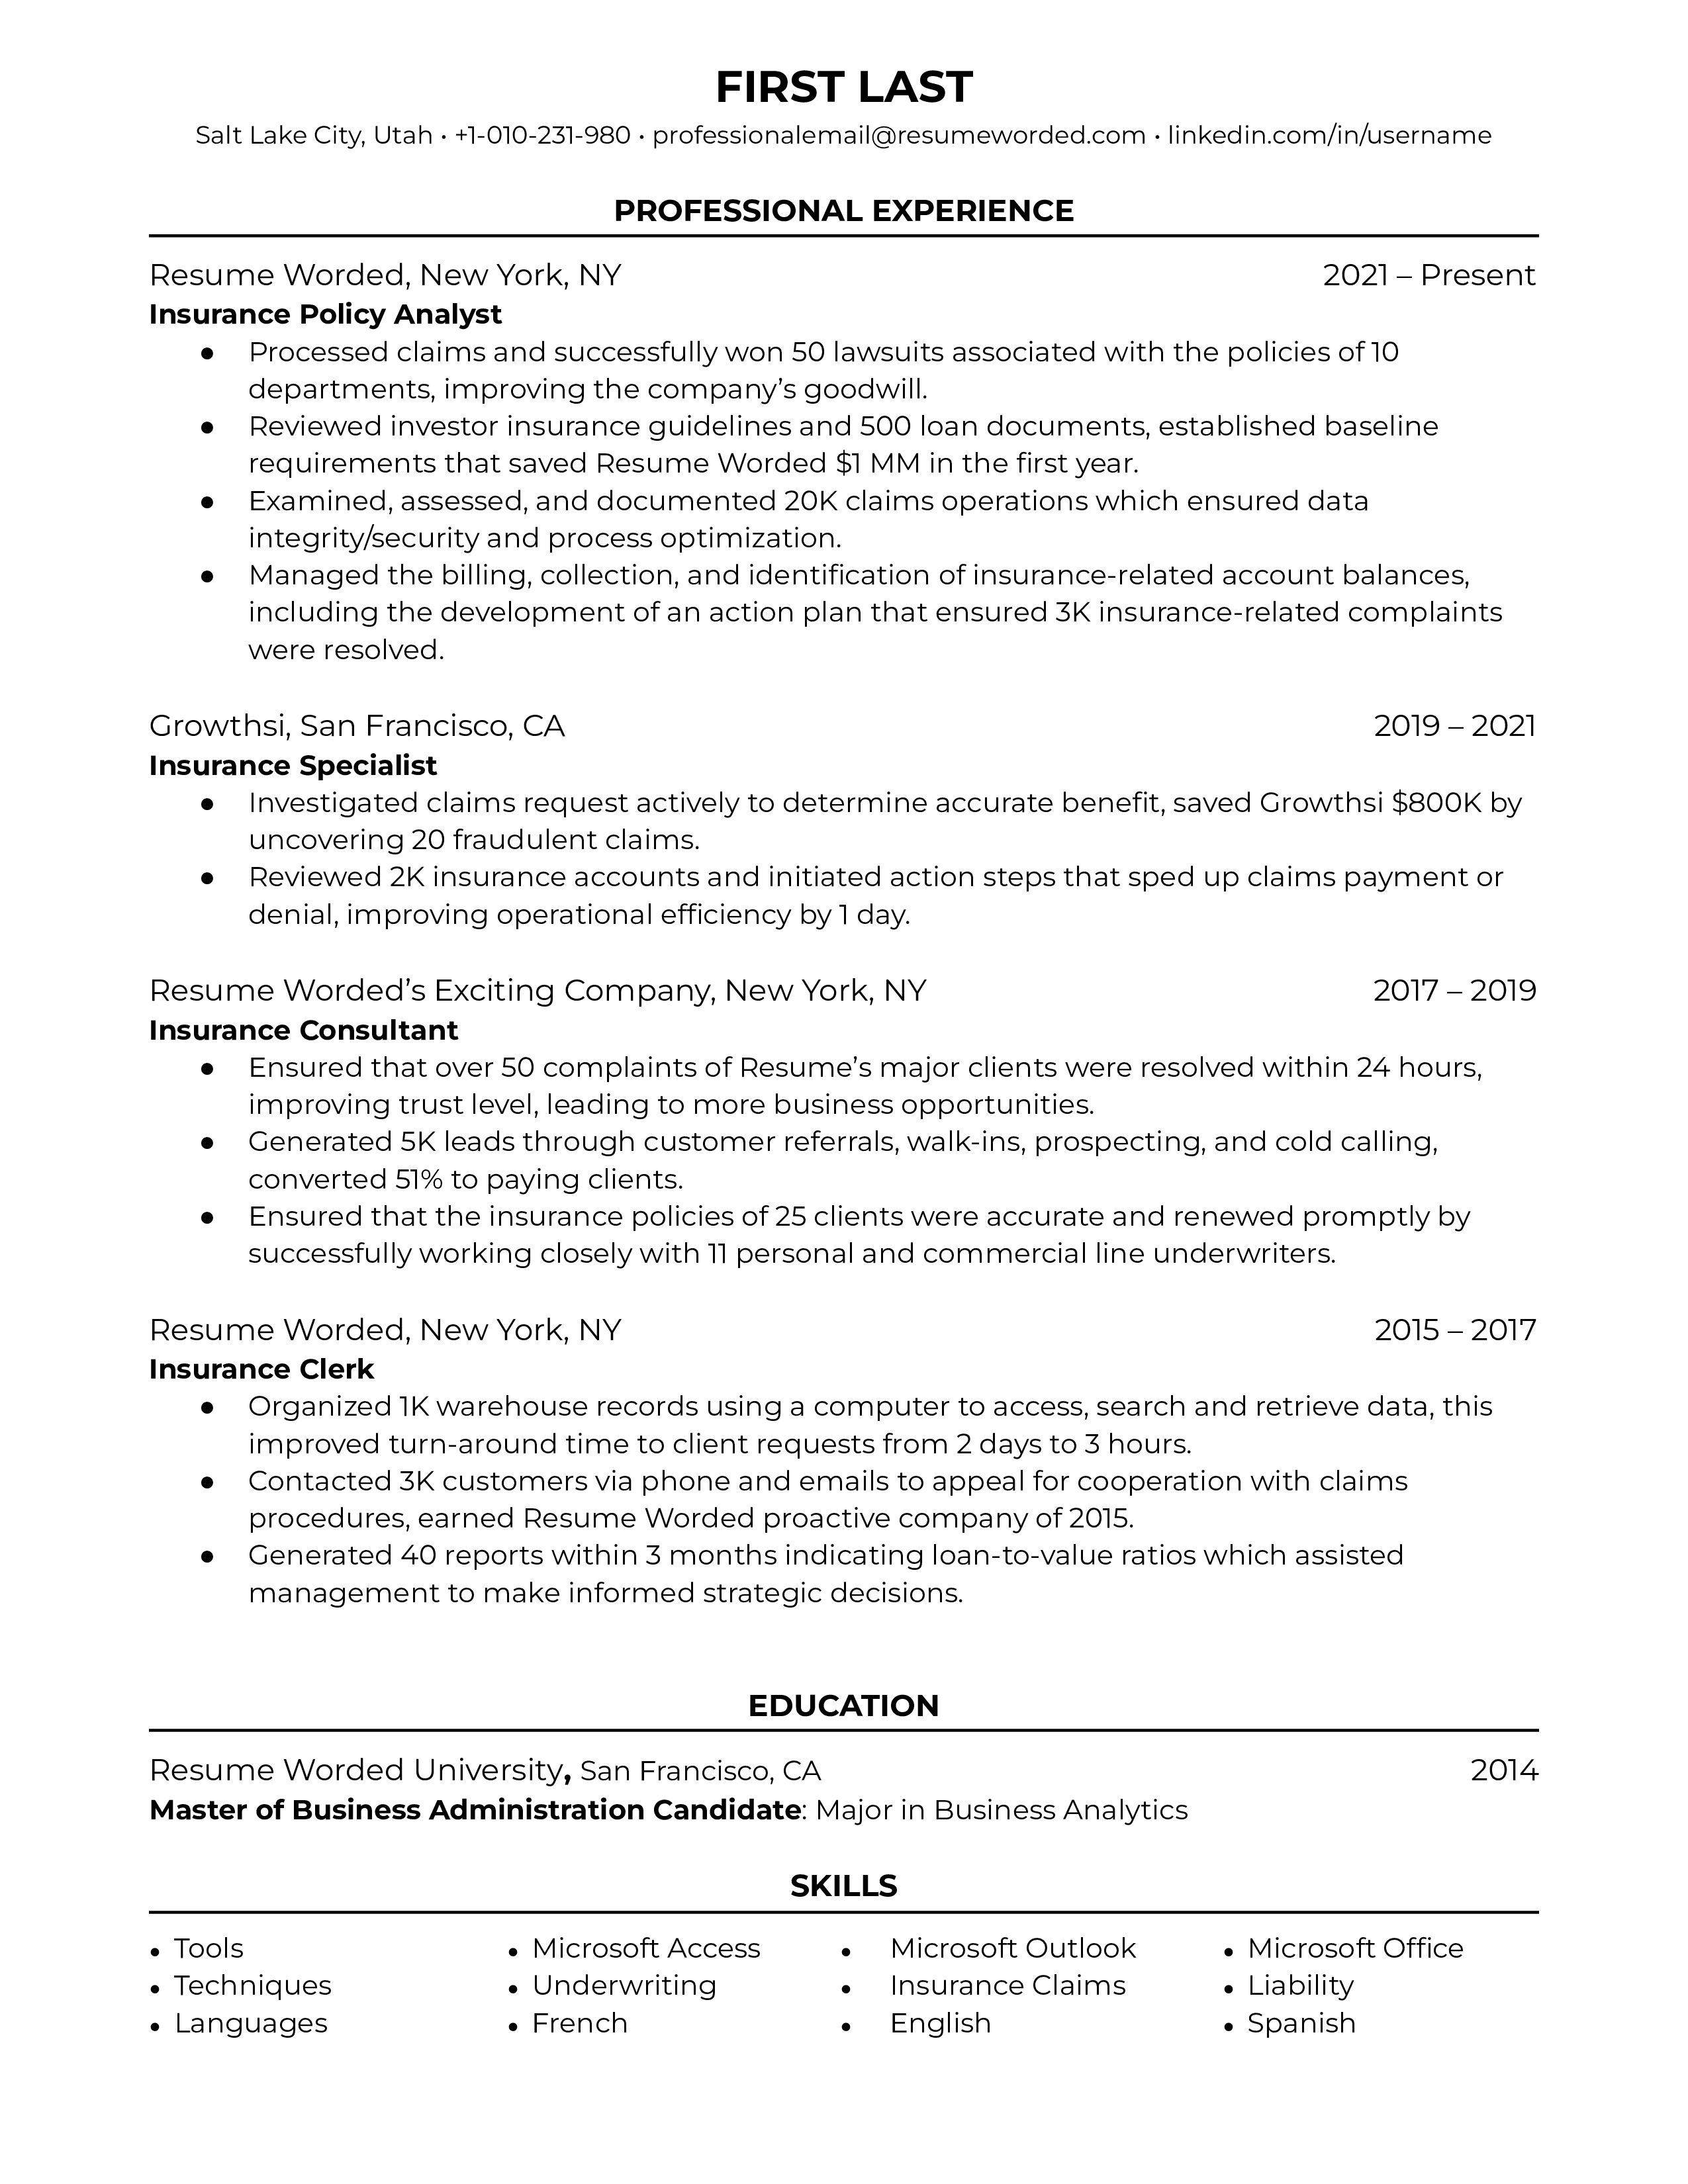 Insurance Policy Analyst Resume Template + Example